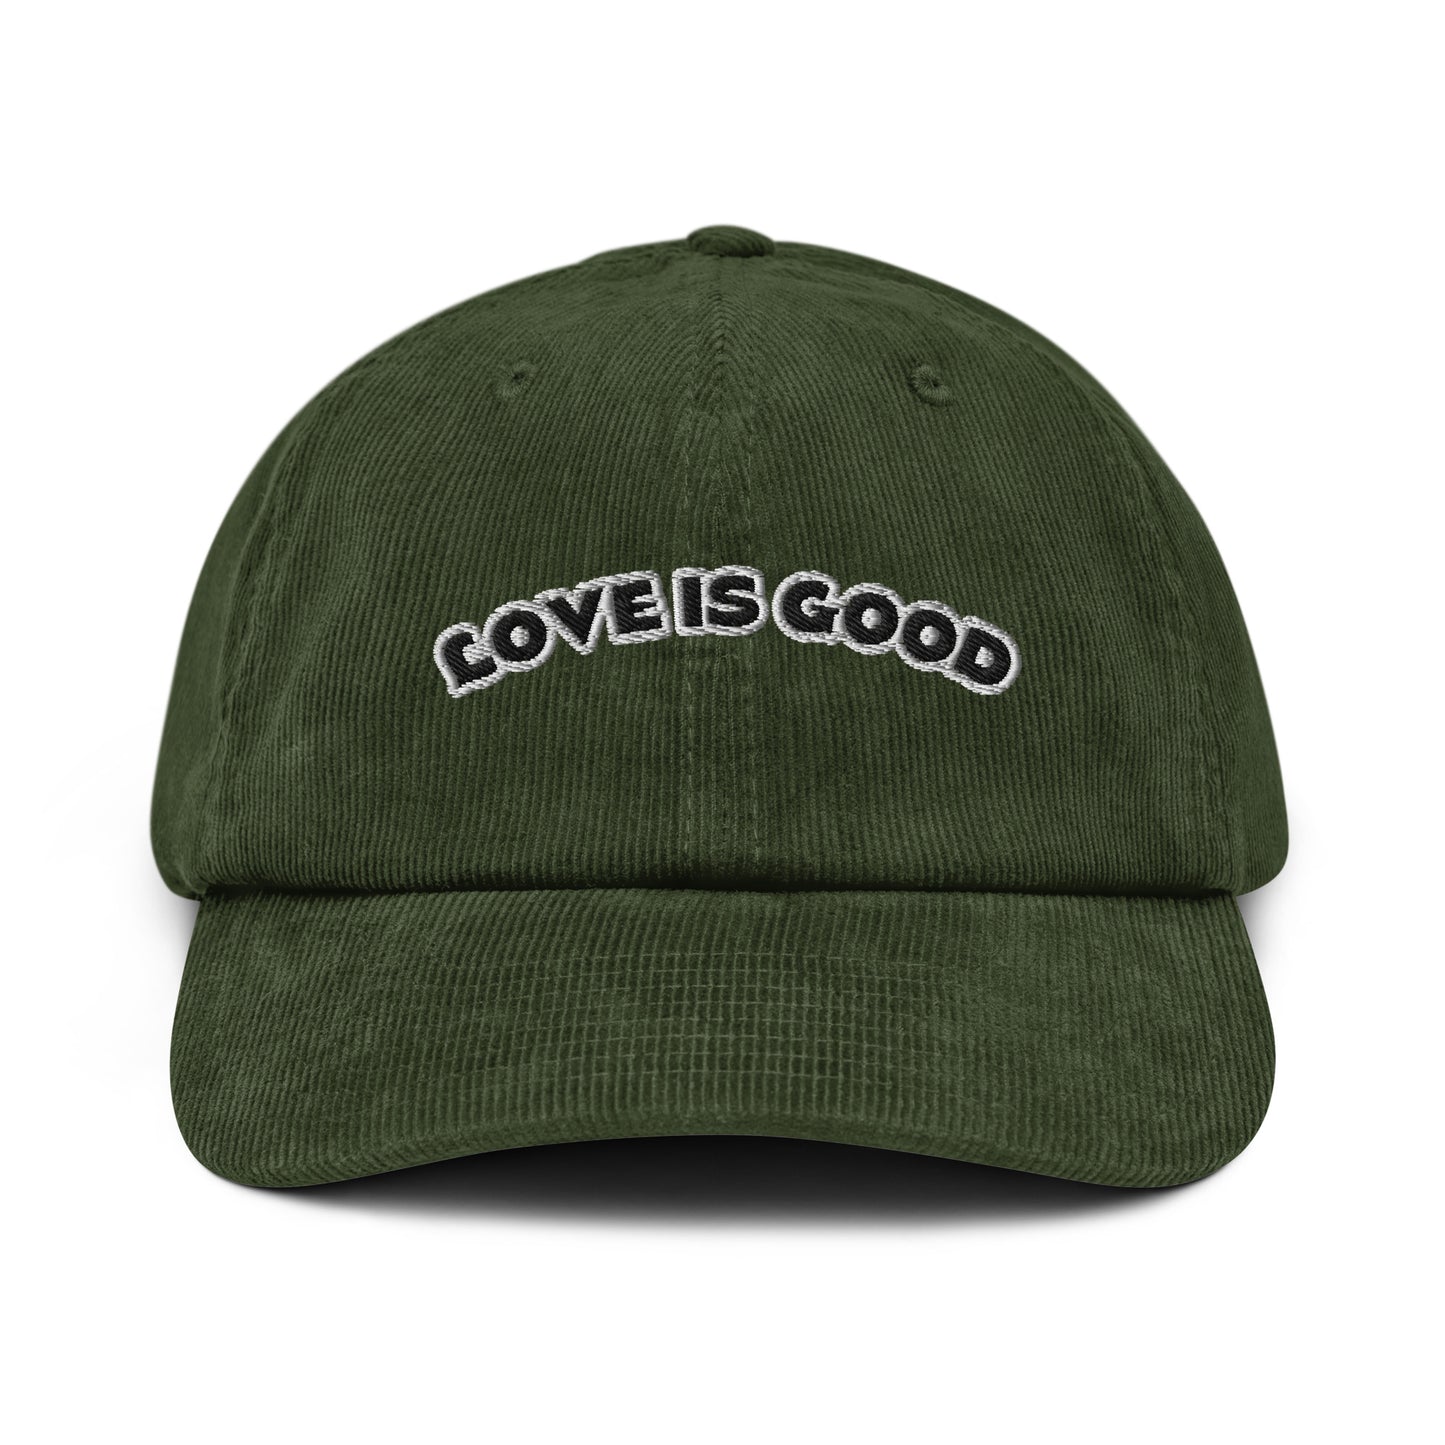 LOVE IS GOOD CORD HAT